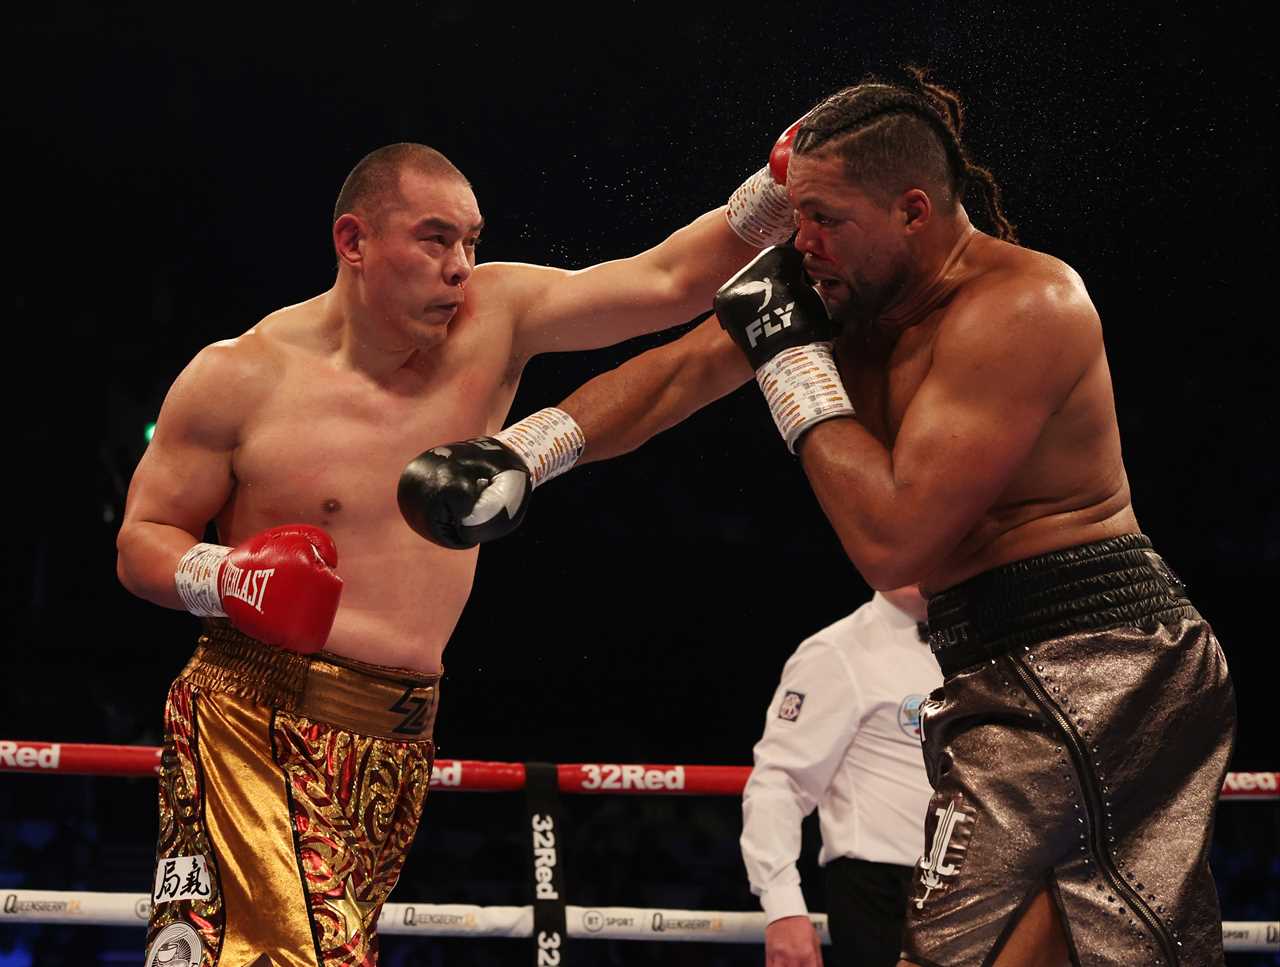 Was Brit's eye injury predicted by Joe Joyce's entrance in the ring before Zhilei's fight?